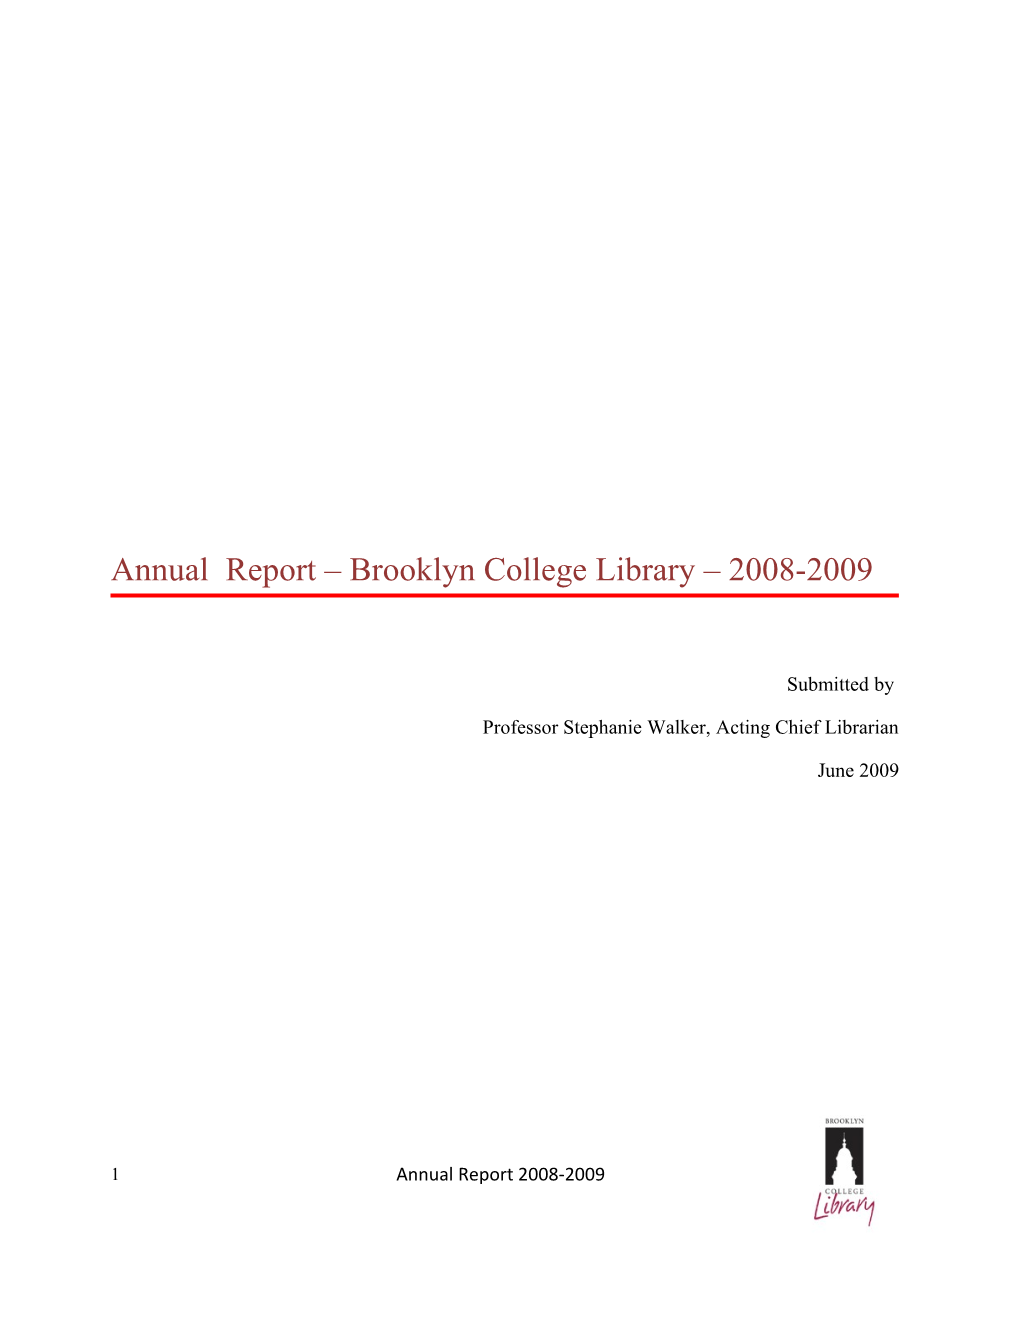 Annual Report – Brooklyn College Library – 2007-2008